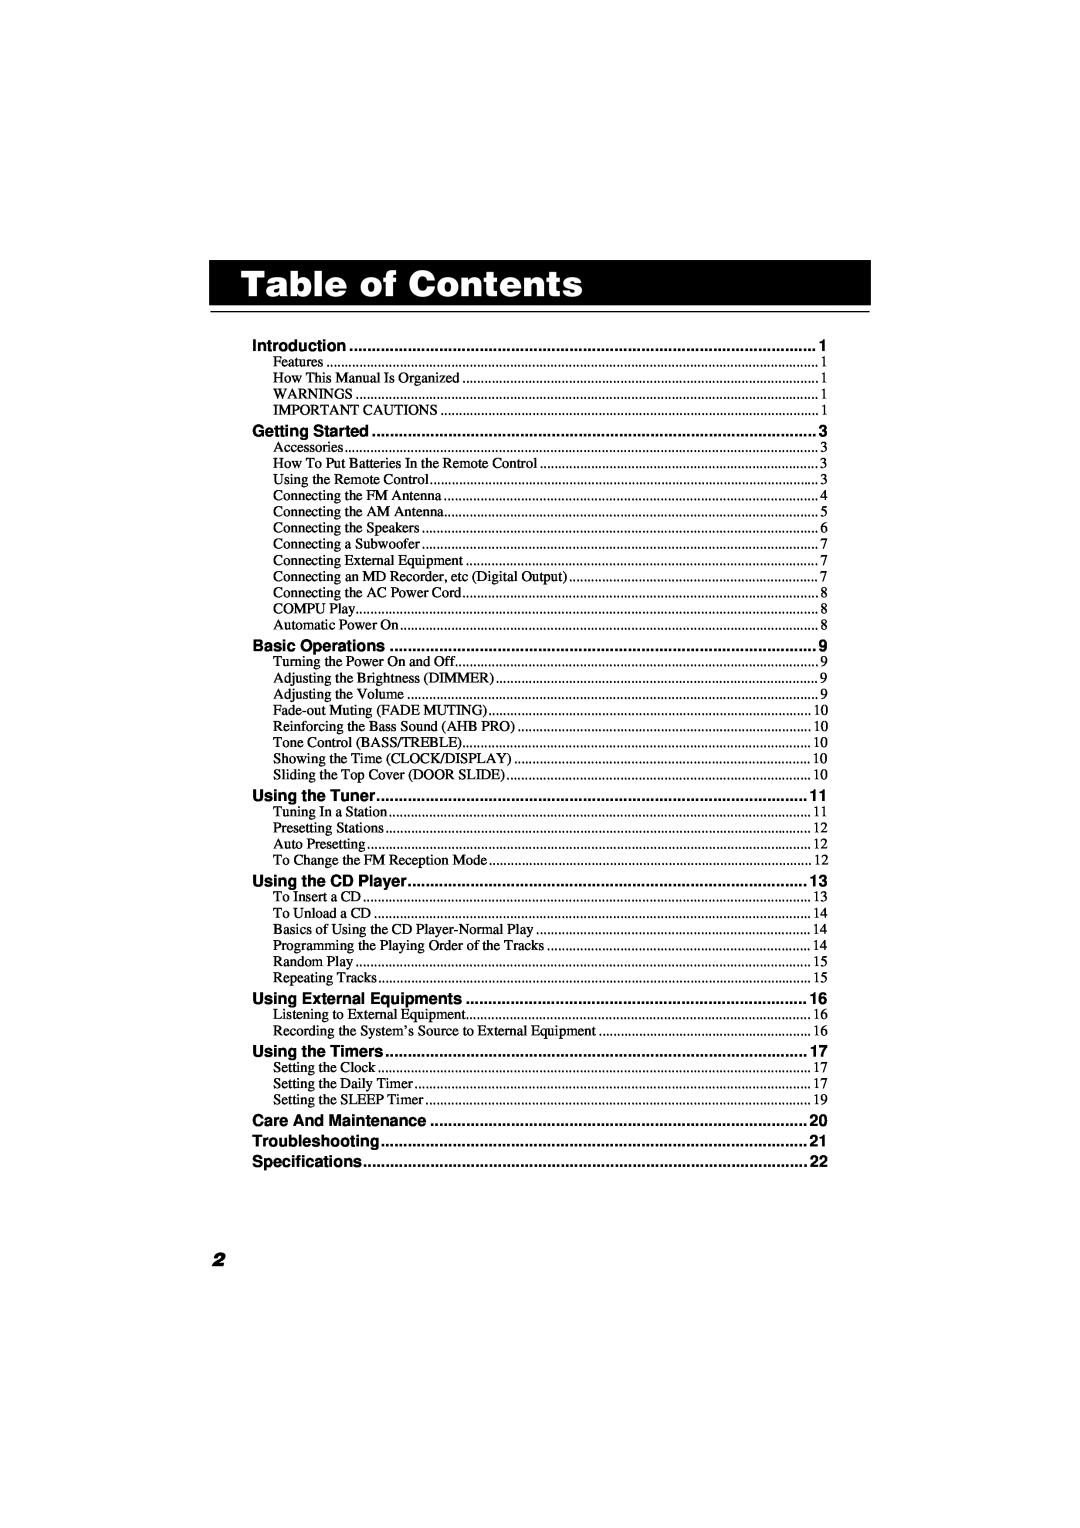 JVC FS-SD990, FS-SD550 manual Table of Contents 